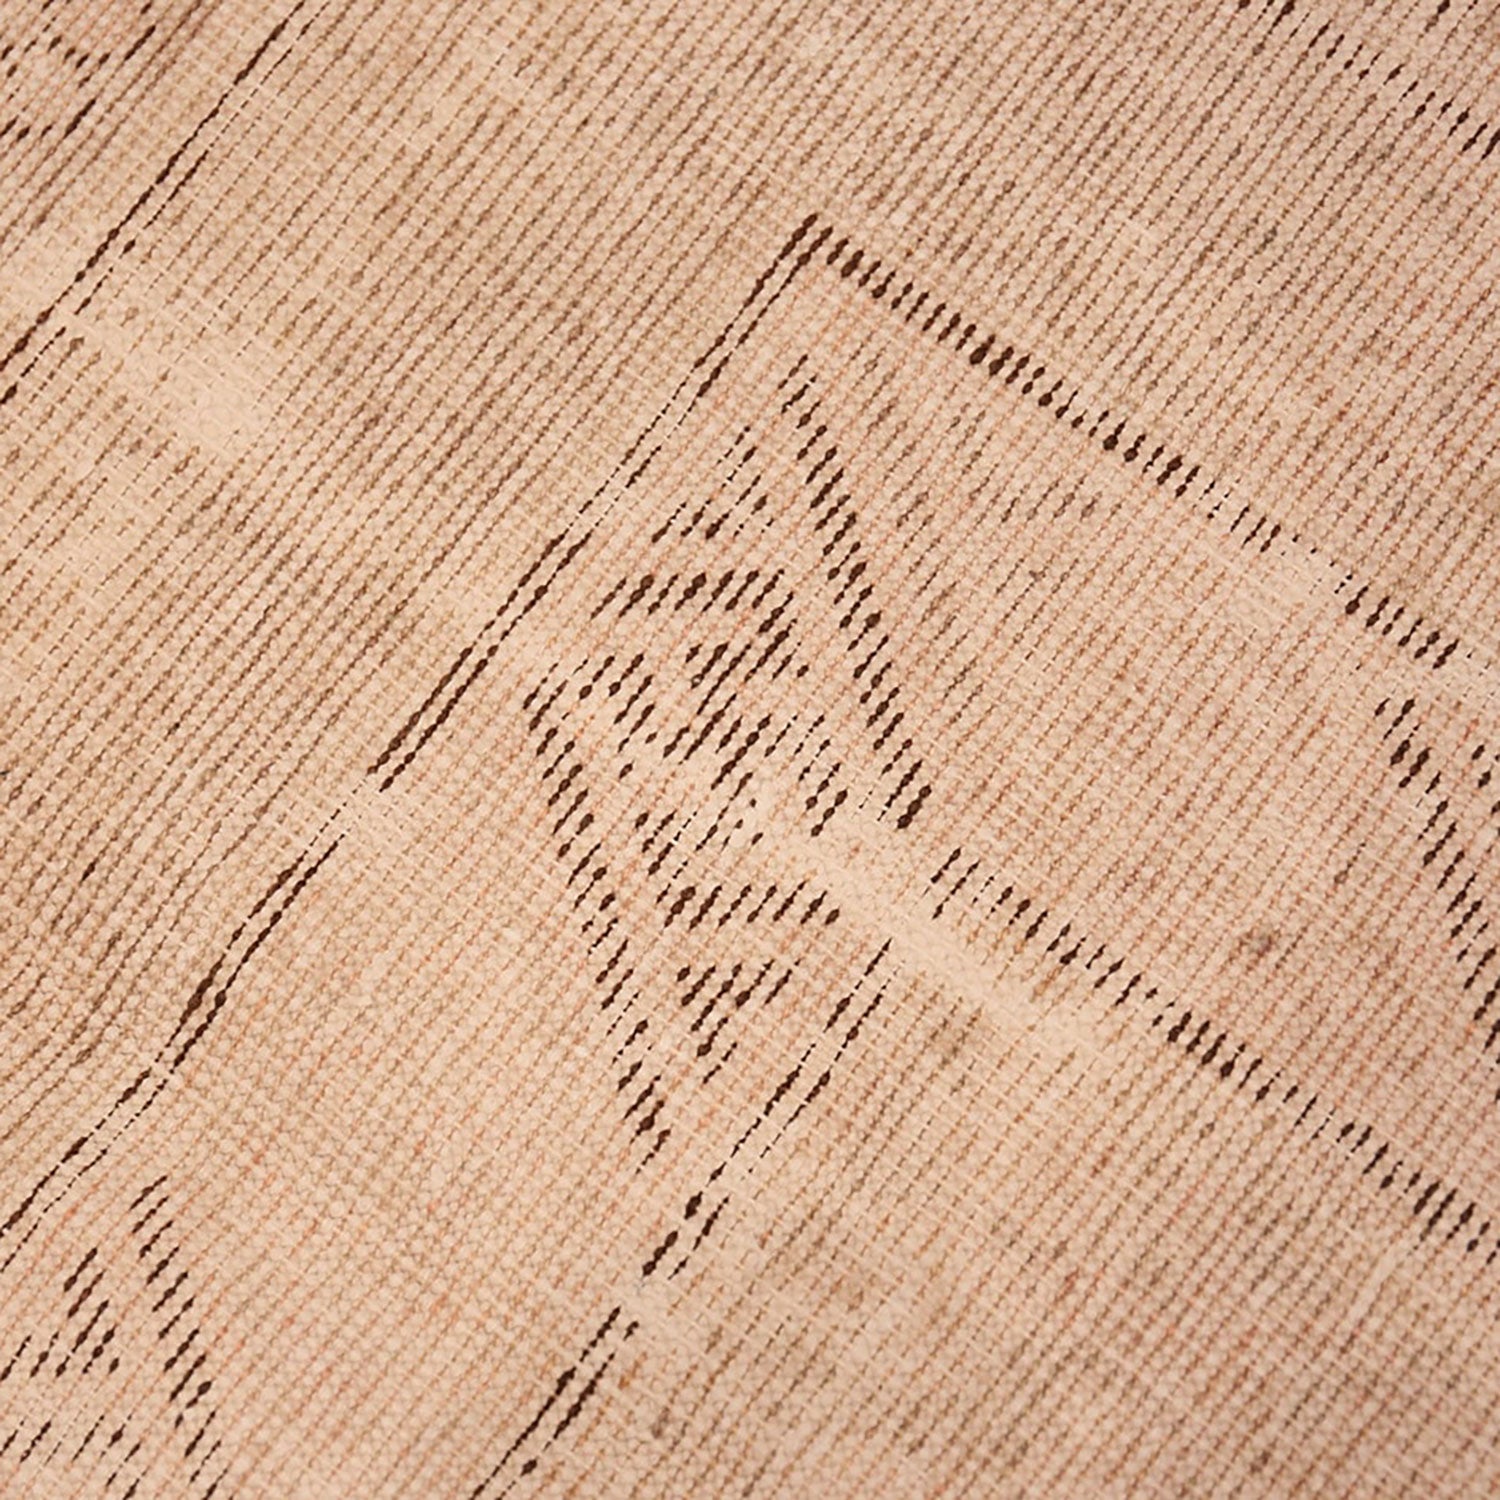 Close-up of fabric with stitched geometric pattern in beige color.